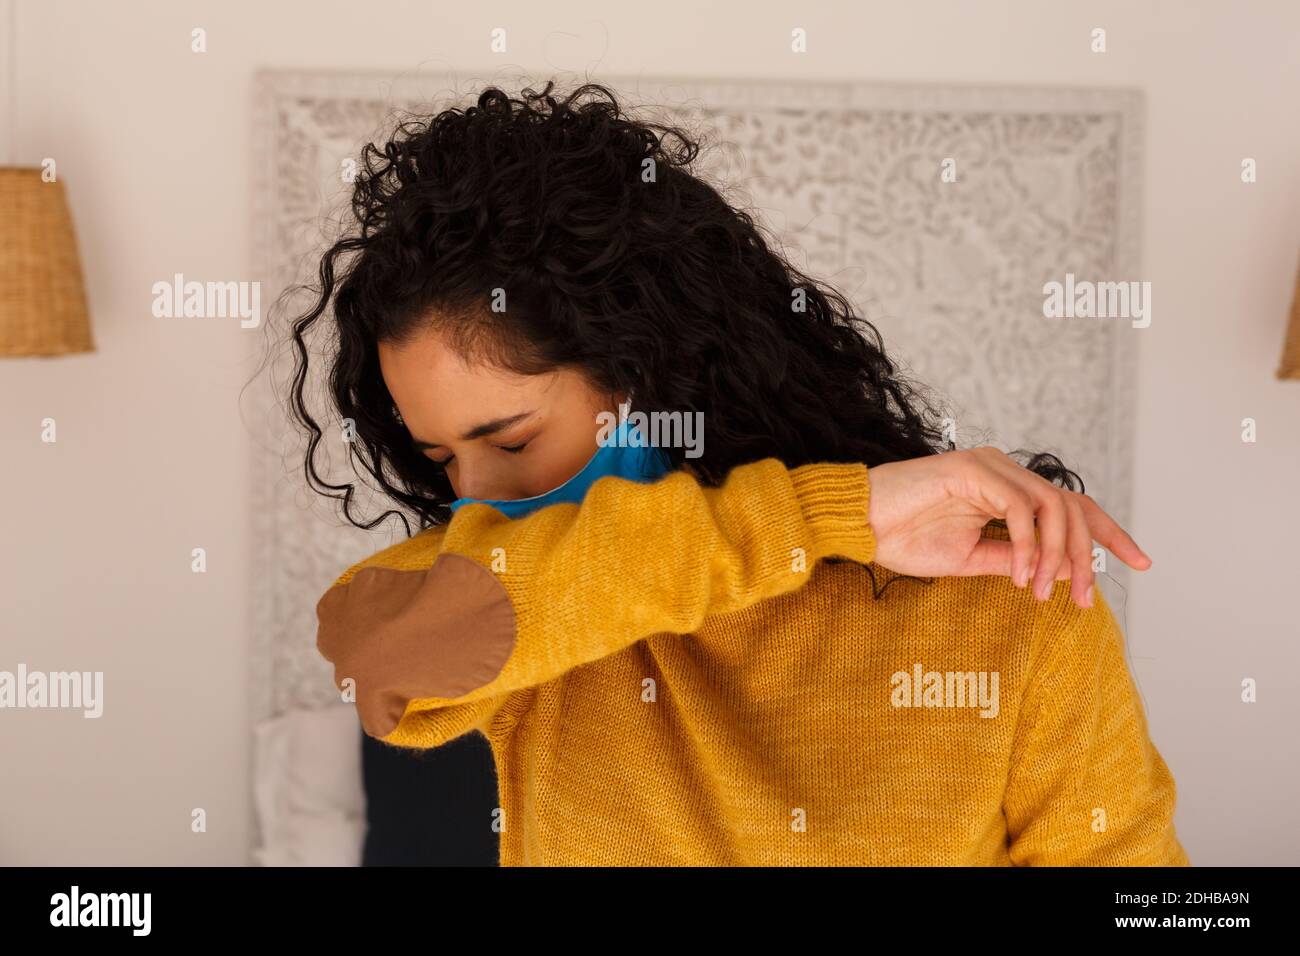 Mixed race woman wearing face mask coughing into arm Stock Photo